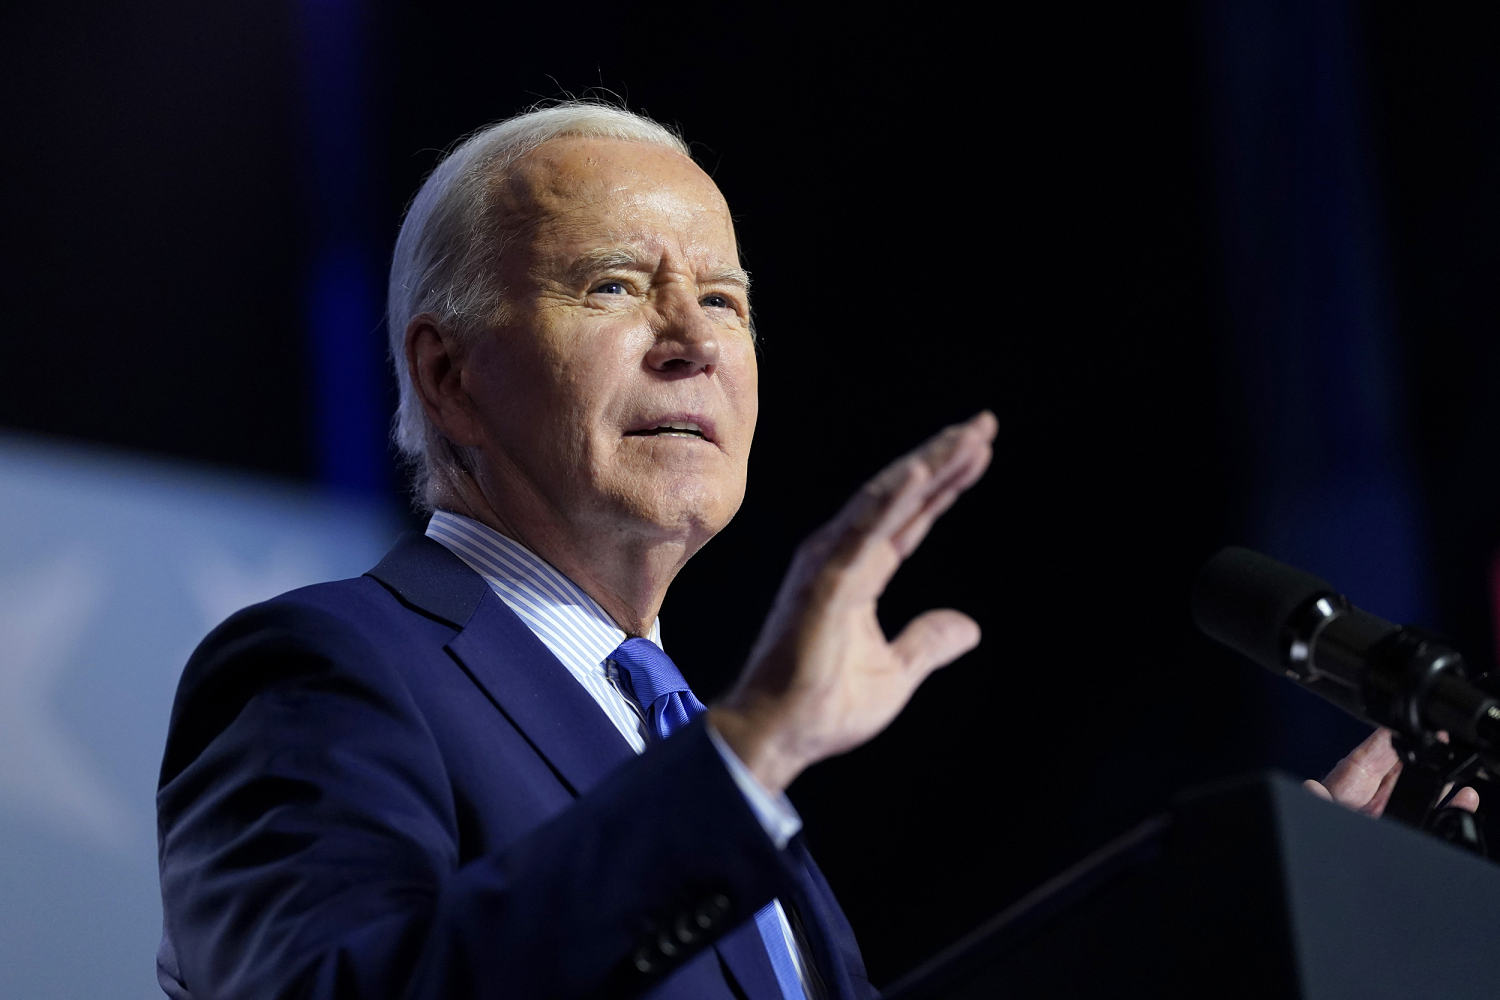 Biden administration faces pressure to step up its response to antisemitic incidents on college campuses